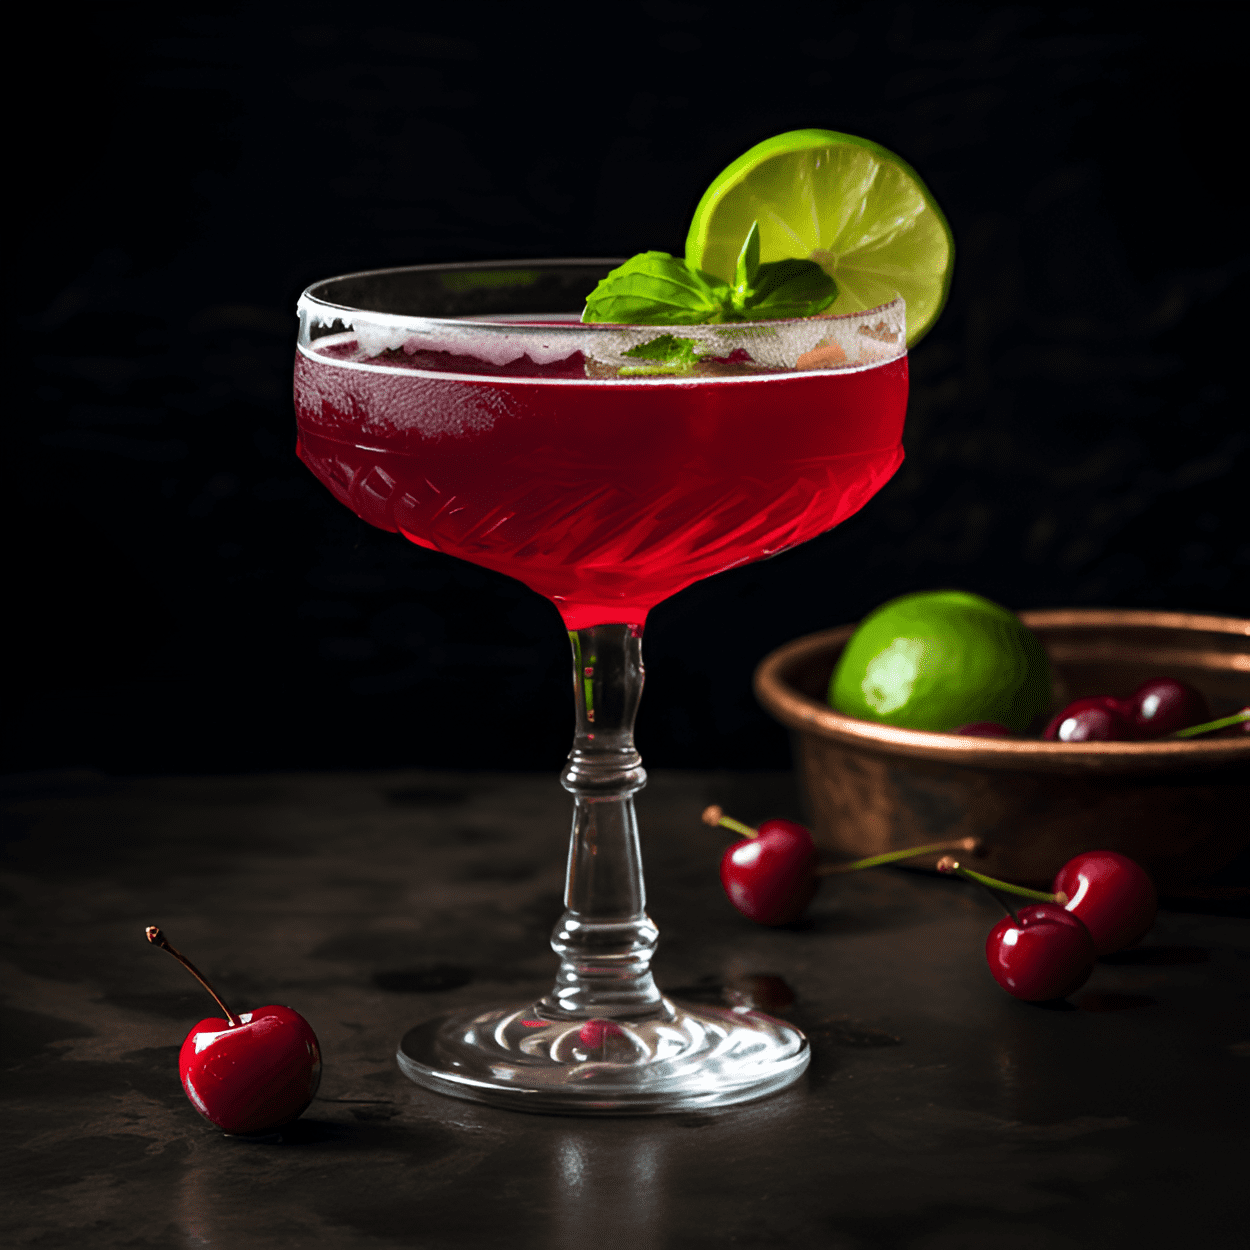 Trini Sorrel Cocktail Recipe - The Trini Sorrel Cocktail is a delightful blend of sweet and sour with a hint of spice. The sorrel lends a tangy, berry-like flavor that is beautifully balanced by the sweetness of the added sugar. The addition of rum gives it a warm, robust kick that perfectly complements the fruity undertones.